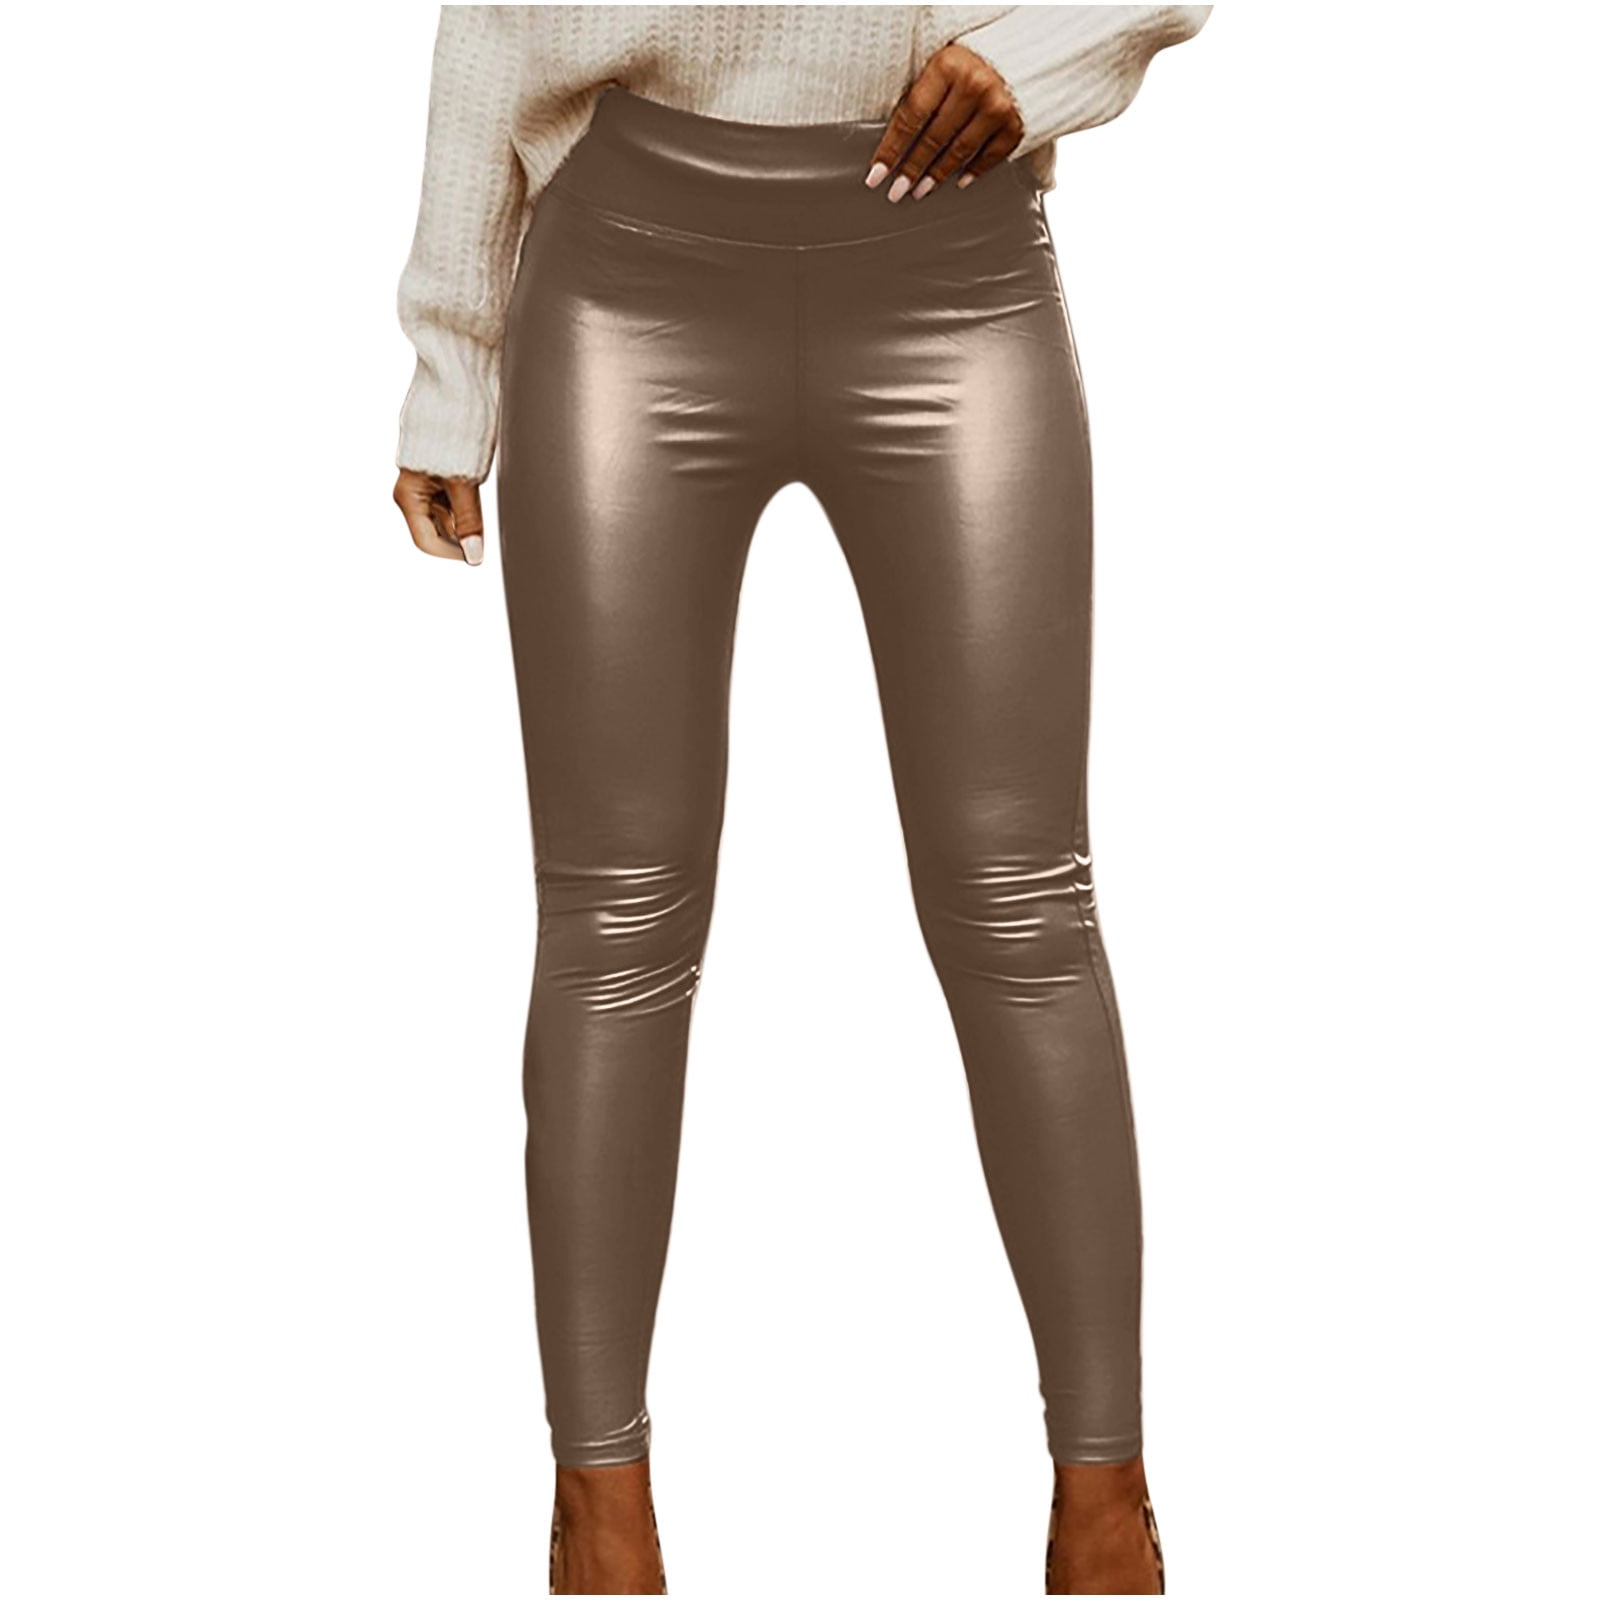 Top Trends for Ladies Leather Pants A Look at What's In Style Now